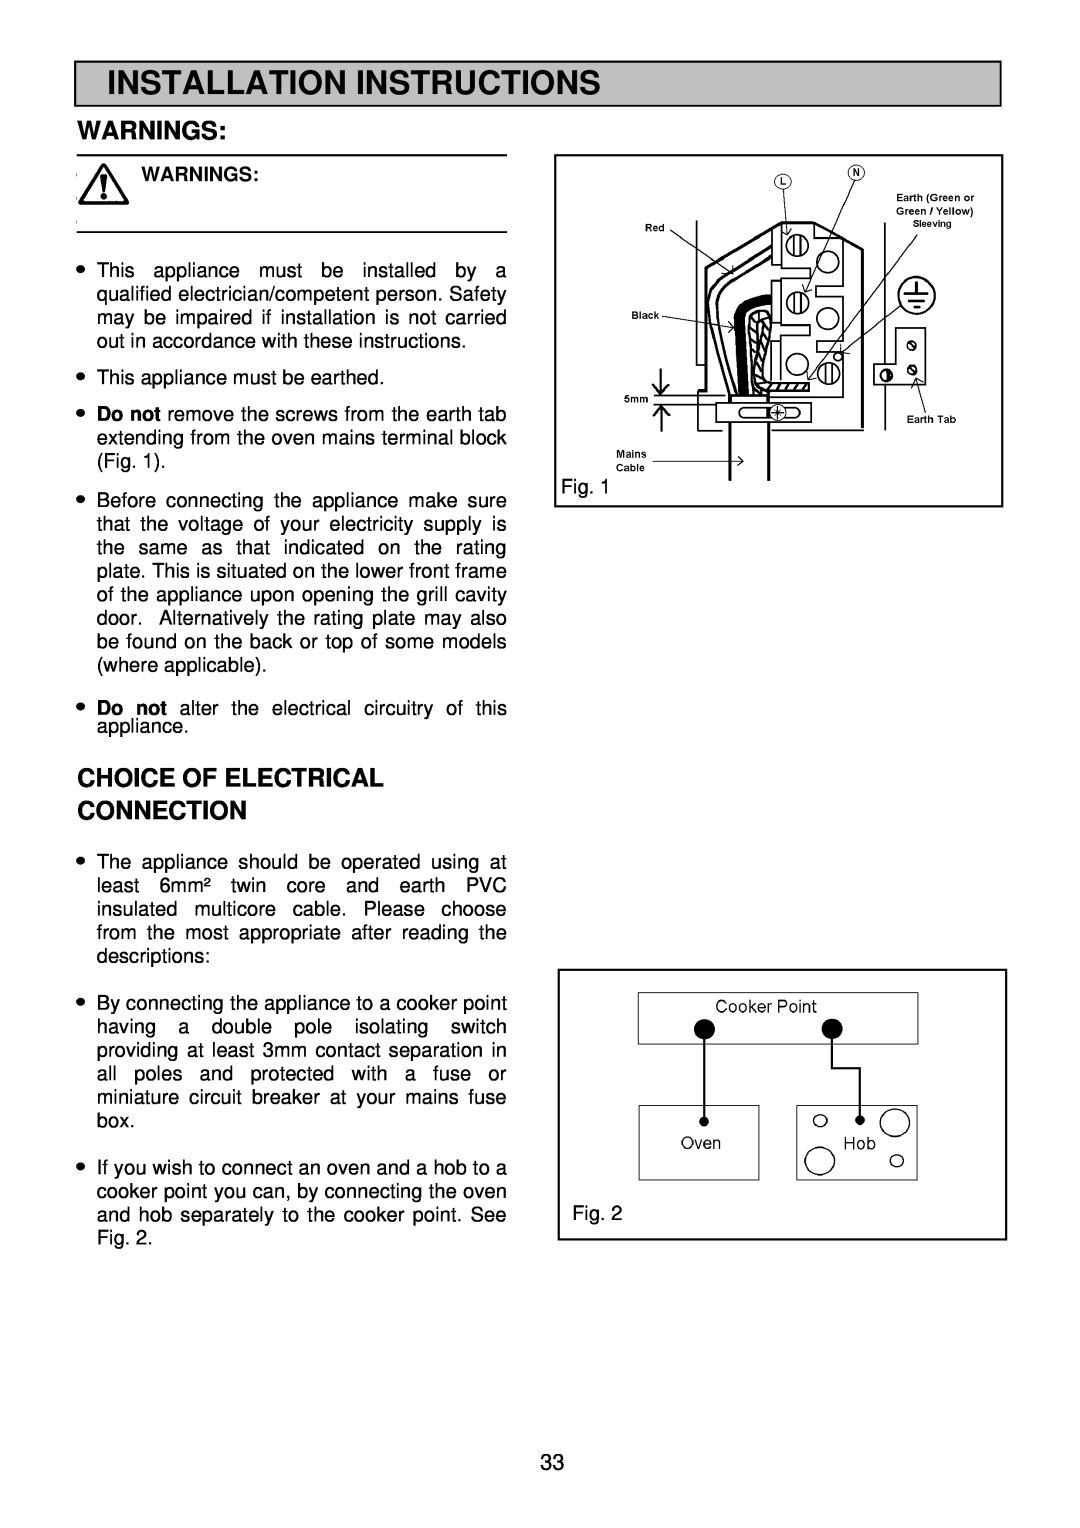 Electrolux EDB705 manual Installation Instructions, Warnings, Choice Of Electrical Connection 